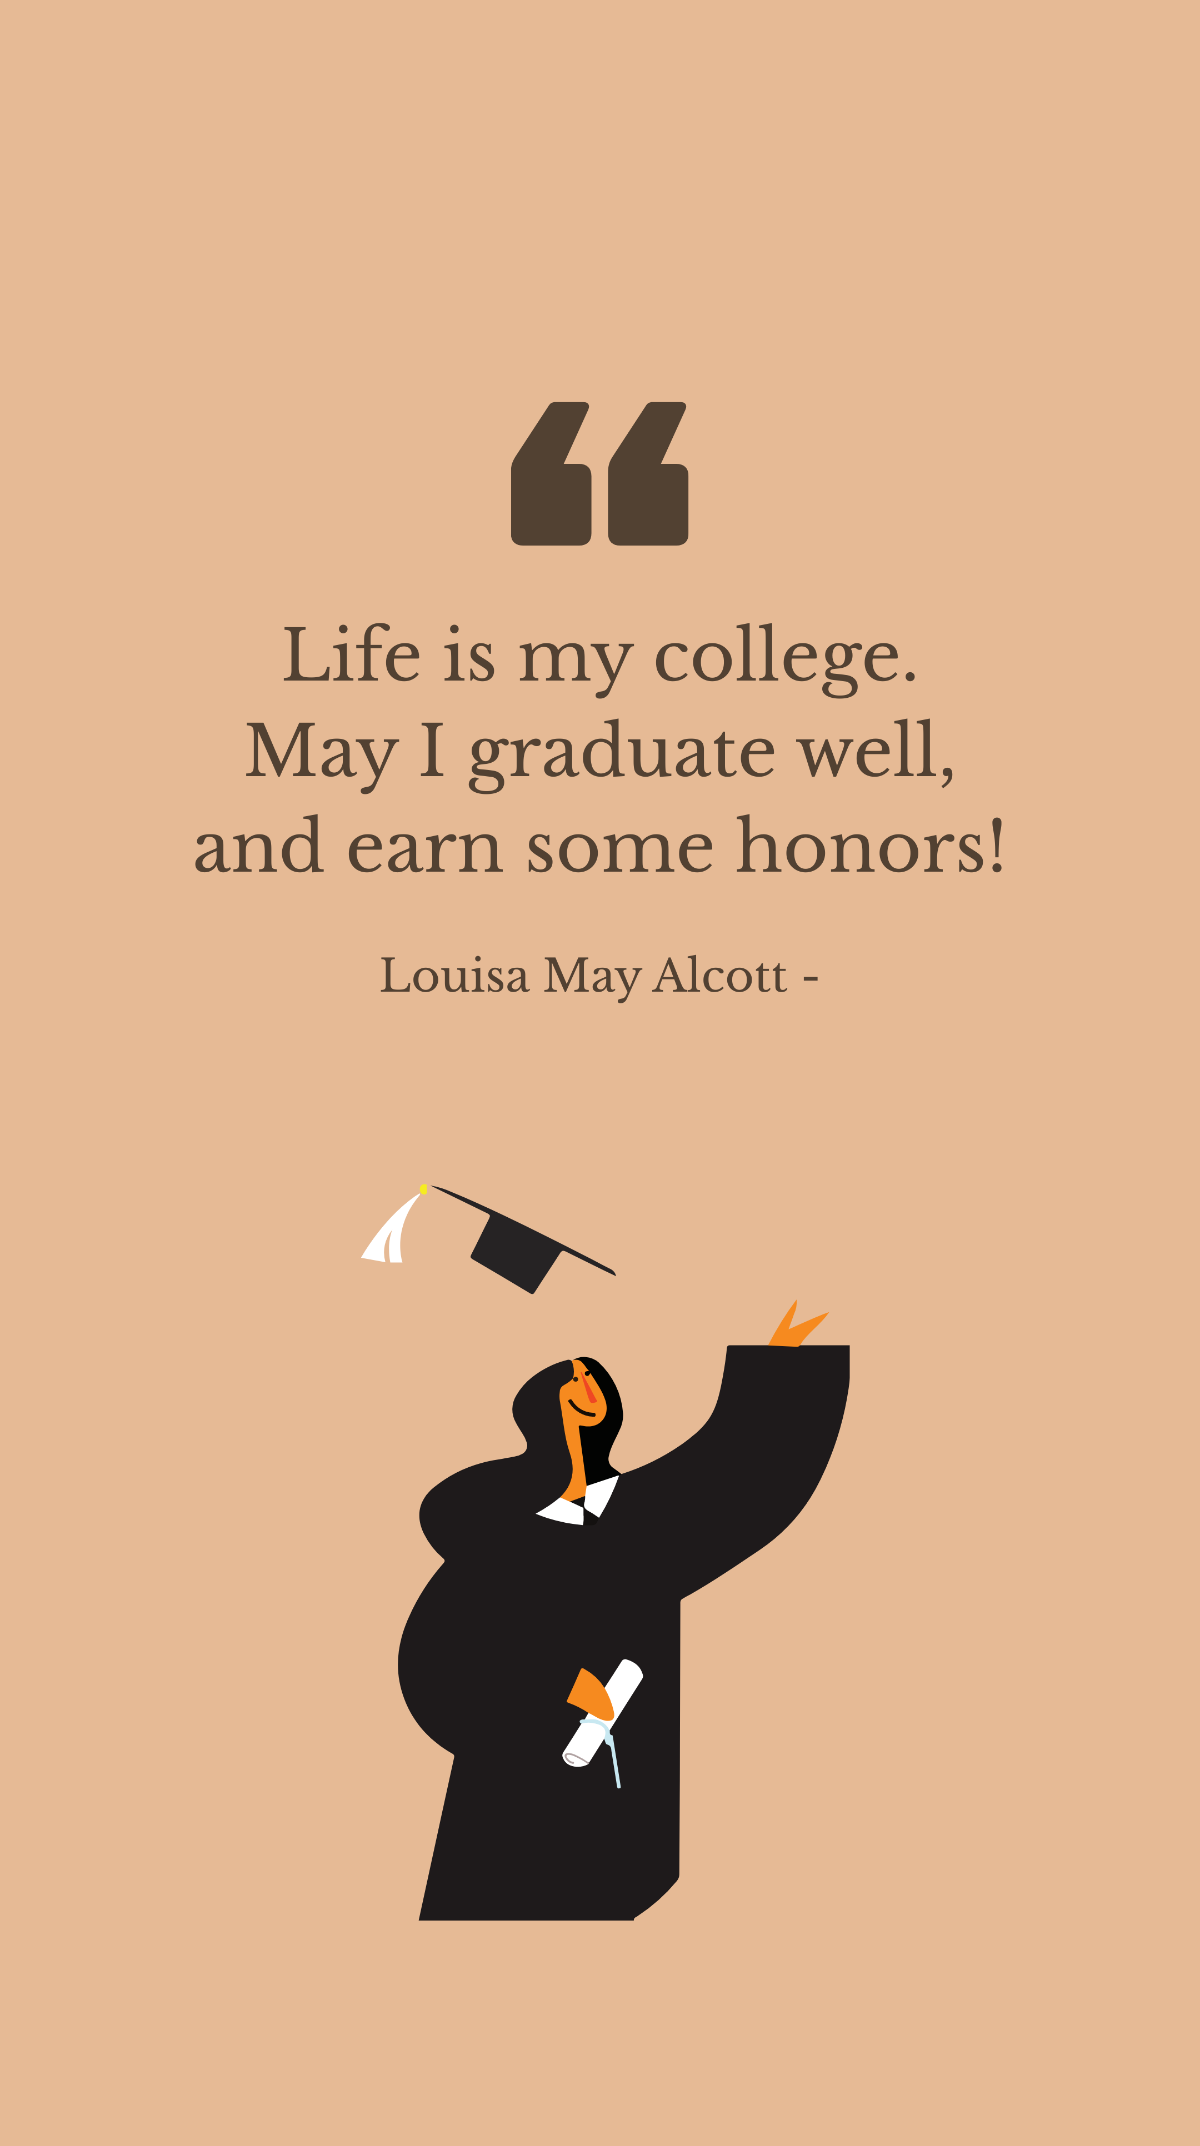 Louisa May Alcott - Life is my college. May I graduate well, and earn some honors!